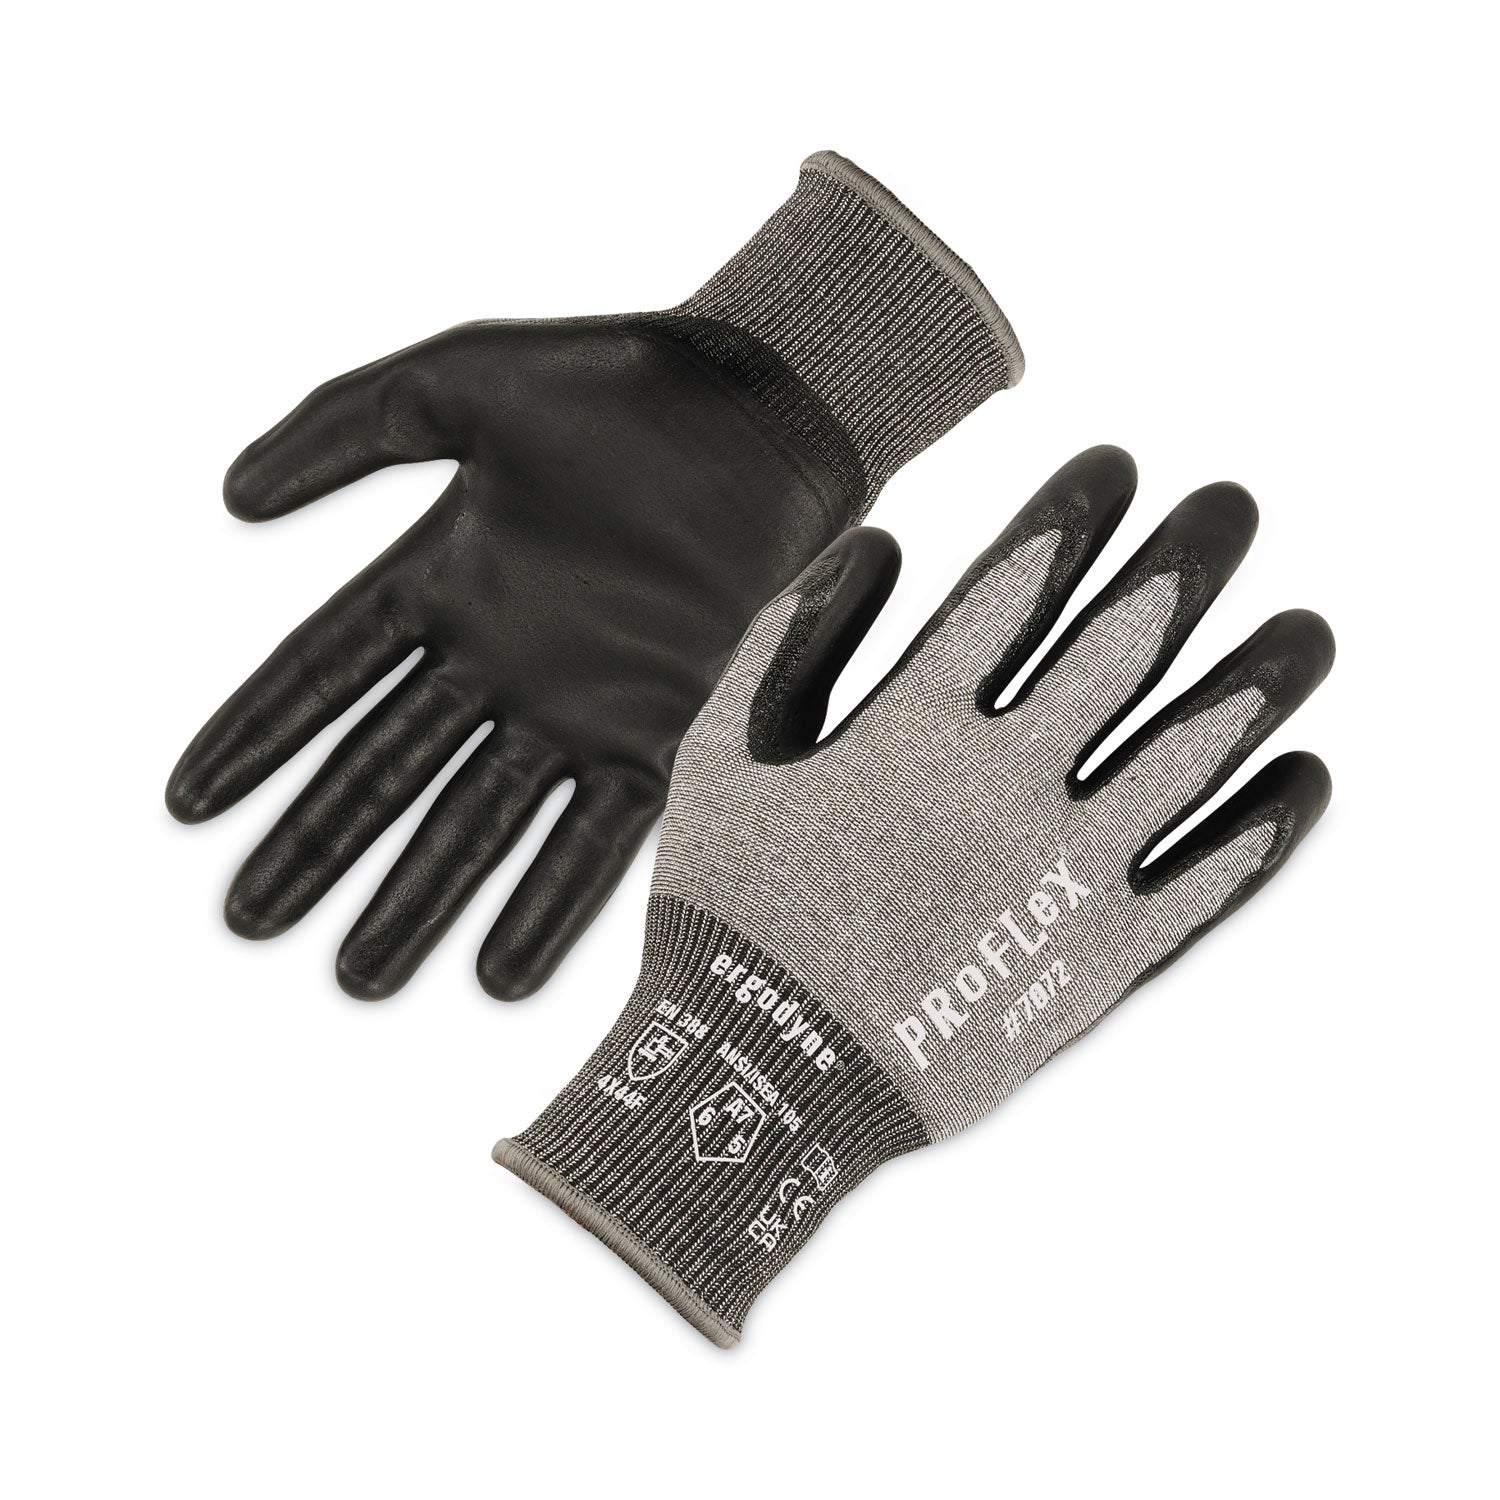 proflex-7072-ansi-a7-nitrile-coated-cr-gloves-gray-medium-pair-ships-in-1-3-business-days_ego10313 - 1